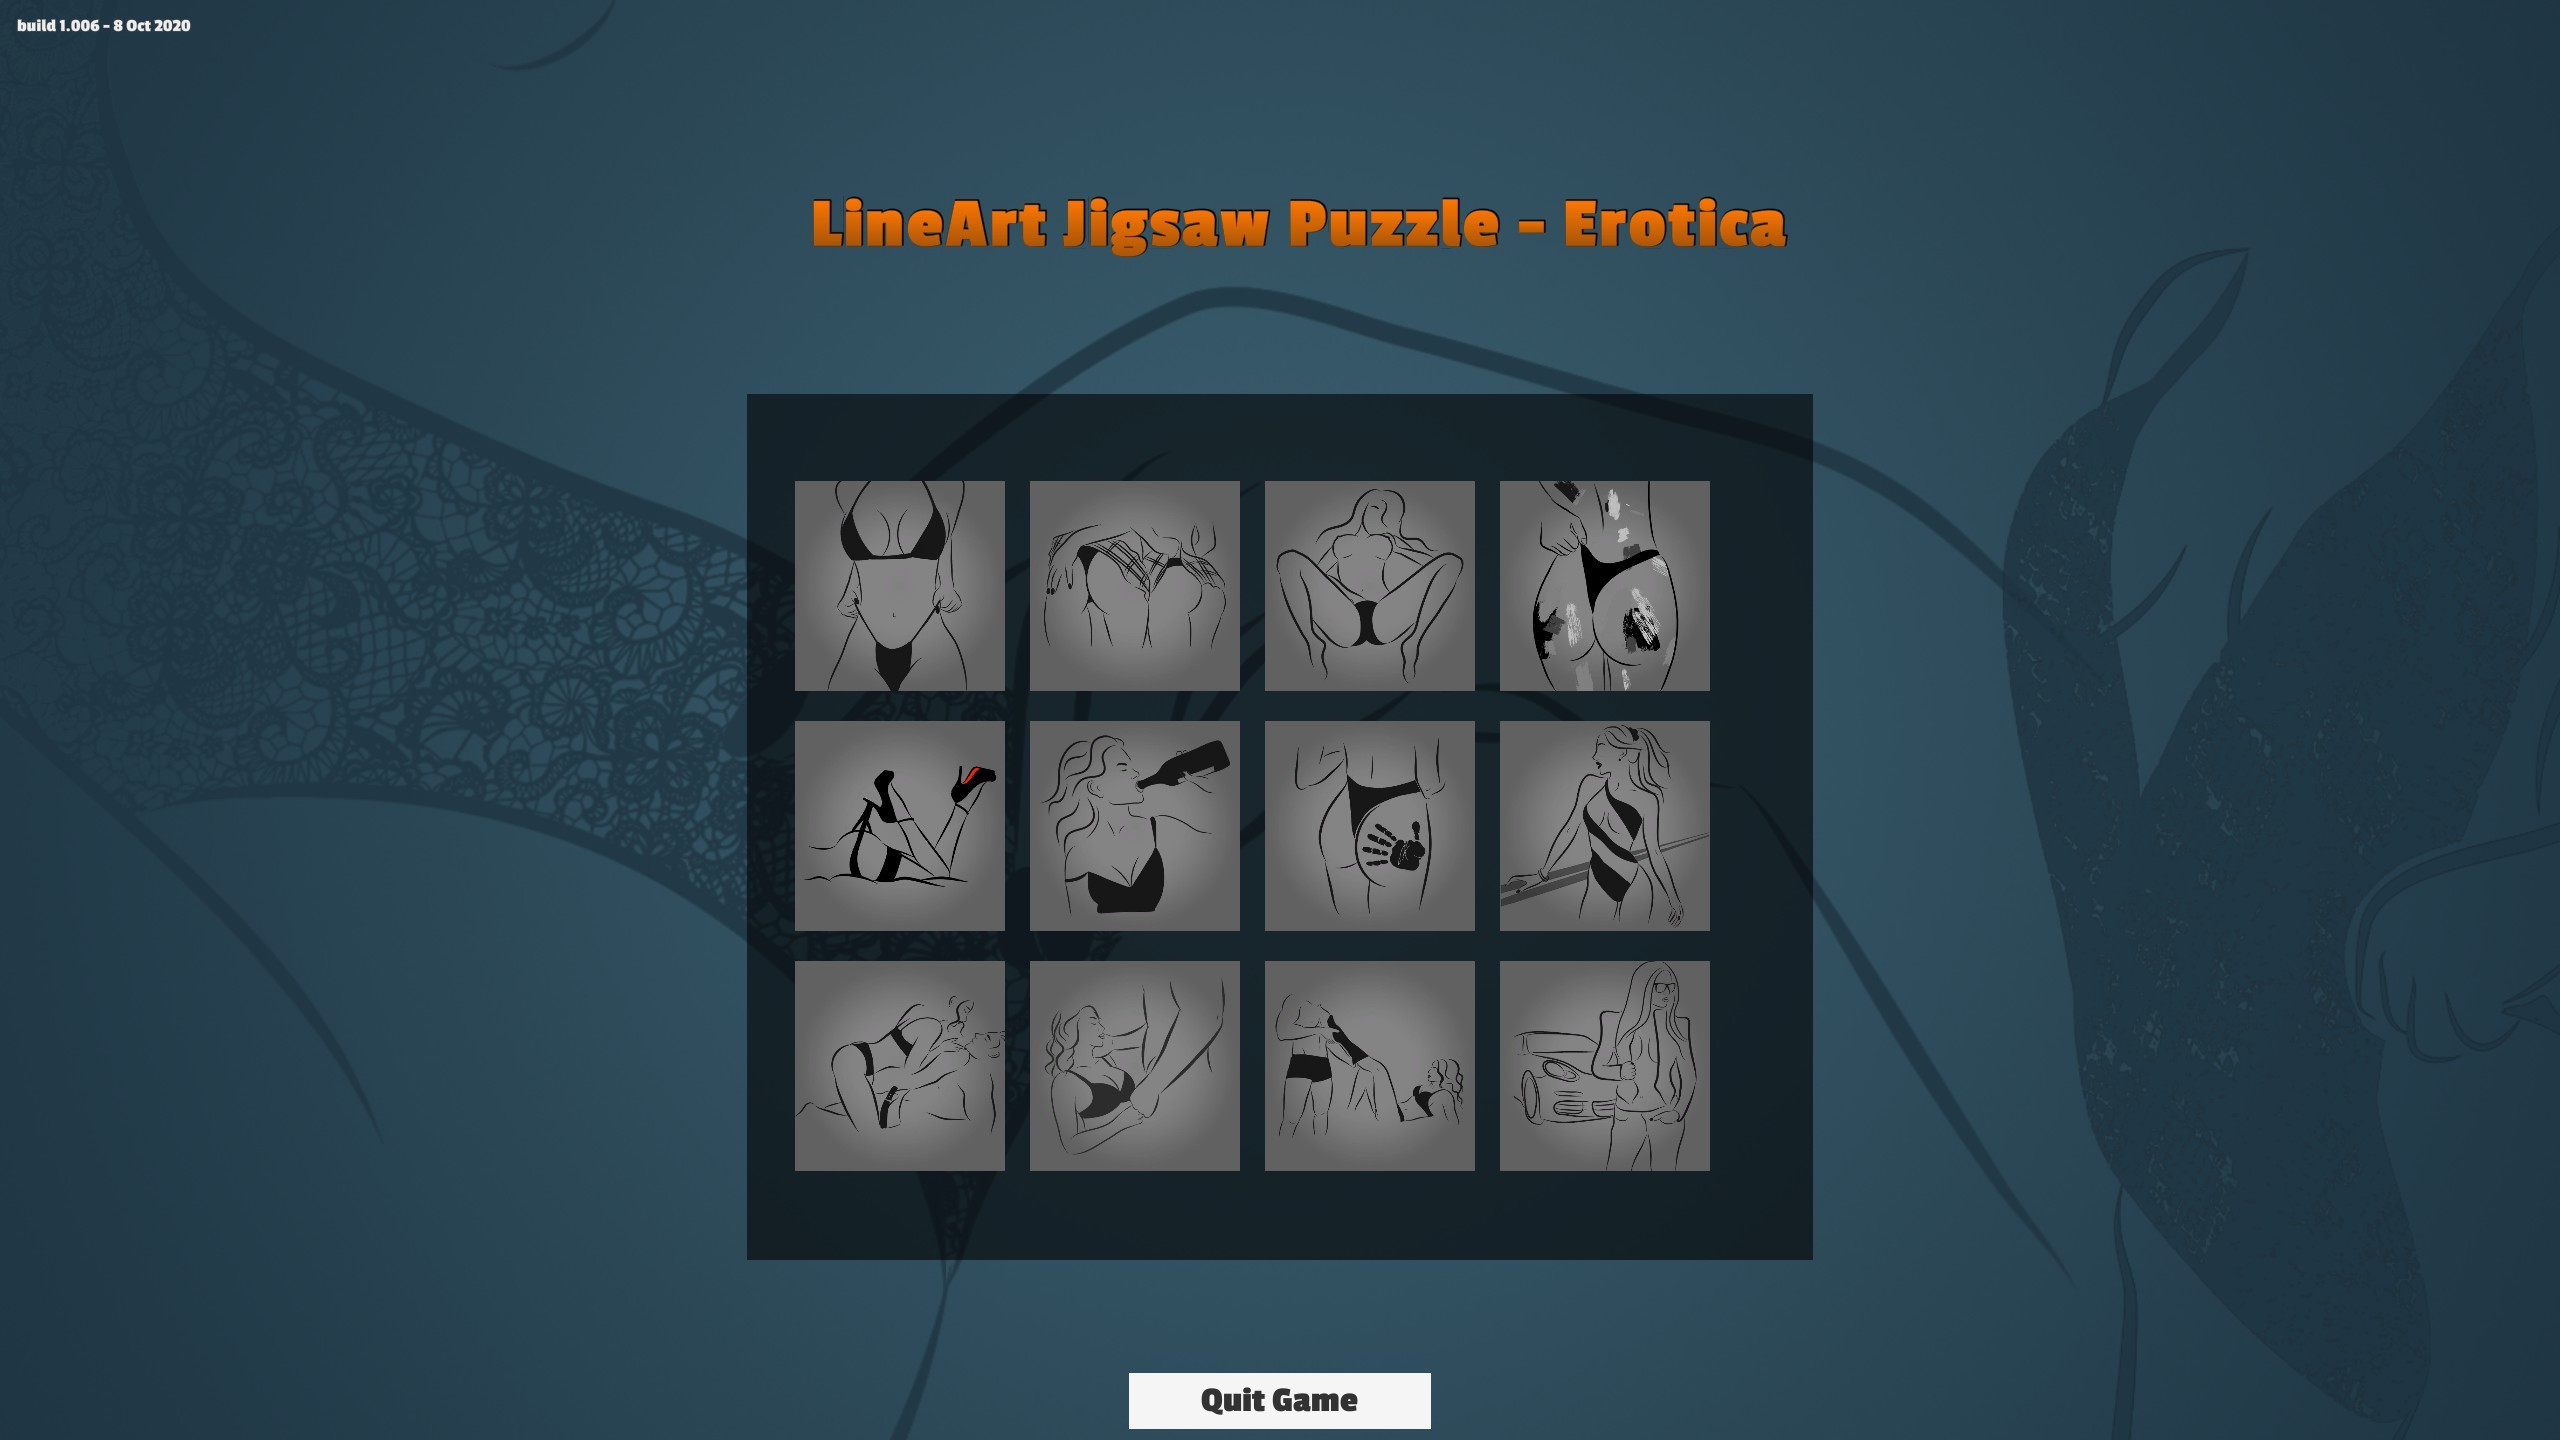 LineArt Jigsaw Puzzle - Erotica Steam CD Key $0.21